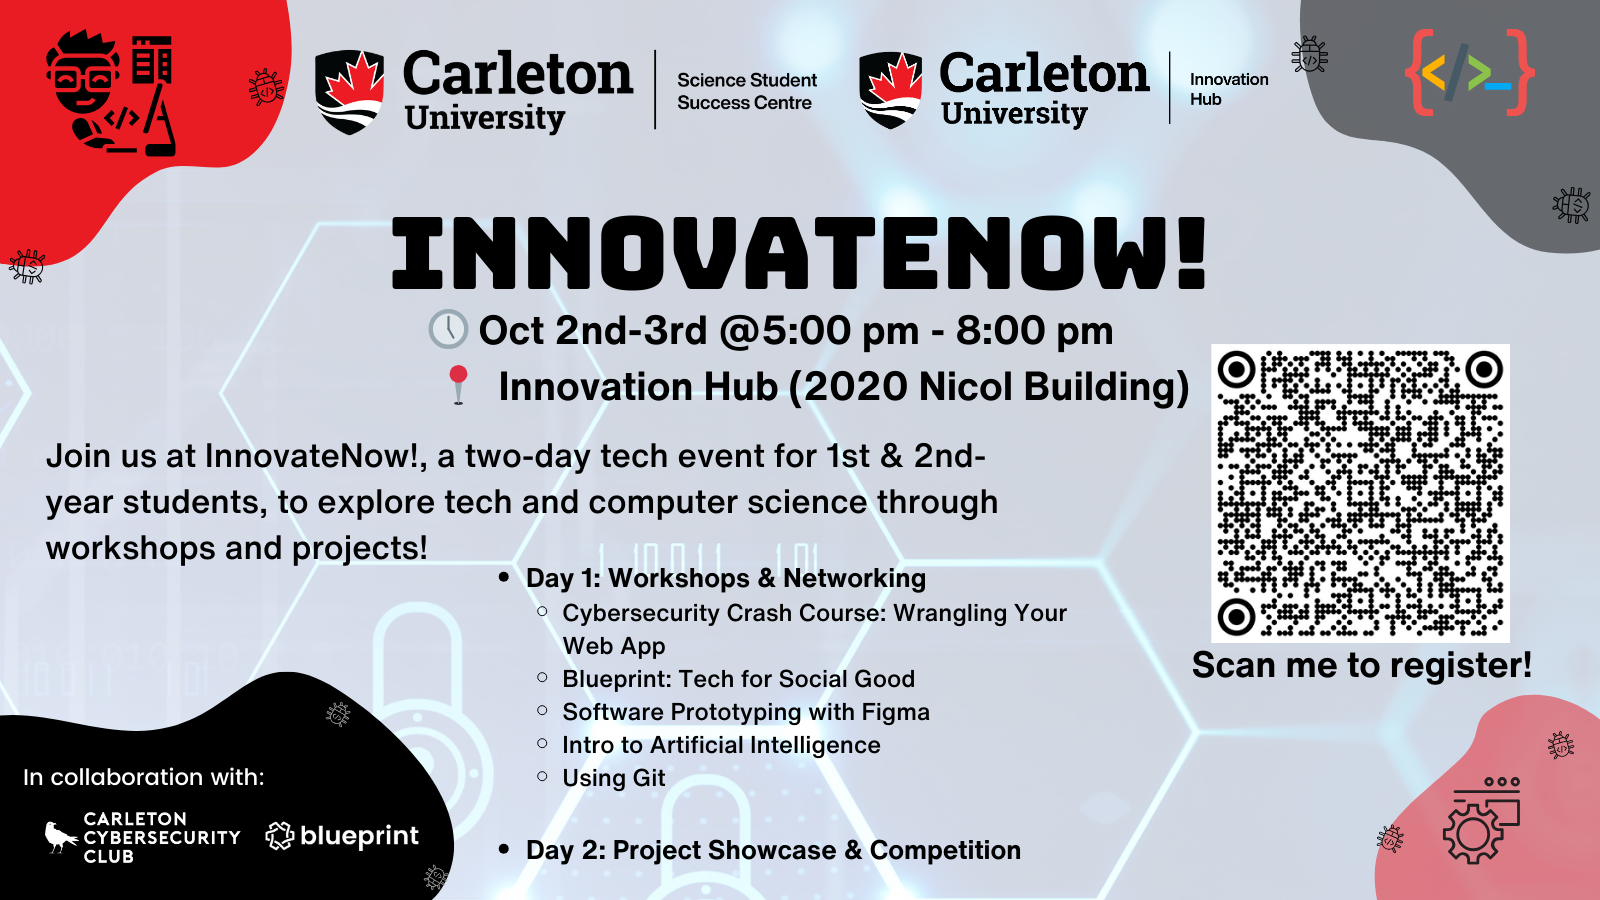 Poster with text. Text reads: Carleton University | Science Student Success Centre. Carleton University | Innovation Hub. InnovateNow! Oct 2nd-3rd @5:00 pm - 8:00 pm. SSSC (3431 Herzberg Laboratories). Join us at InnovateNow!, a two-day tech event for 1st & 2nd year students, to explore tech and computer science through workshops and projects! - Day 1: Workshops & Networking - Cybersecurity Crash Course: Wrangling Your Web App - Software Prototyping with Figma - Intro to Artificial Intelligence - Using Git. - Day 2: Project Showcase & Competition. Scan me to register! QR code shown. In collaboration with with the Carleton Cybersecurity Club and Carleton Blueprint. 